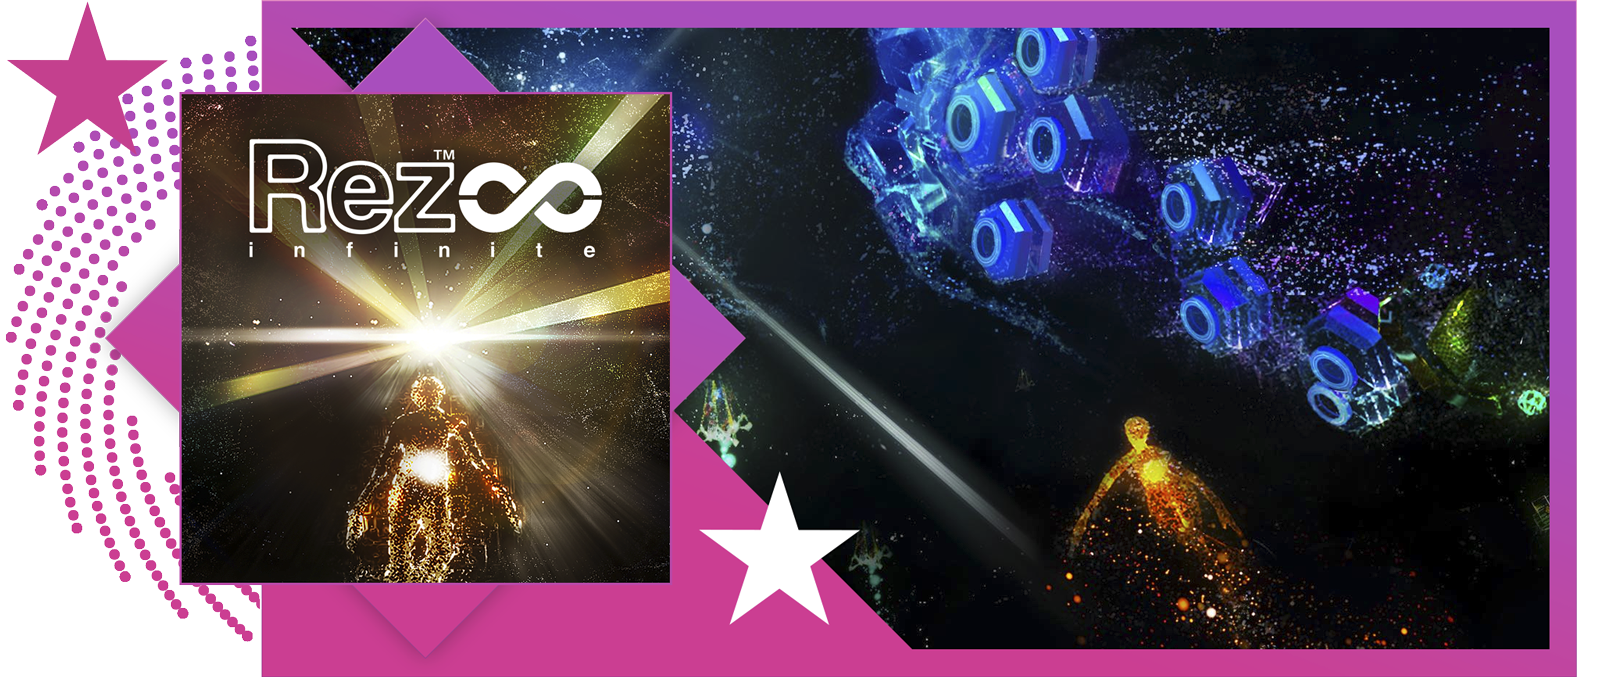 Best rhythm games feature image, featuring key art and gameplay from Rez Infinite.